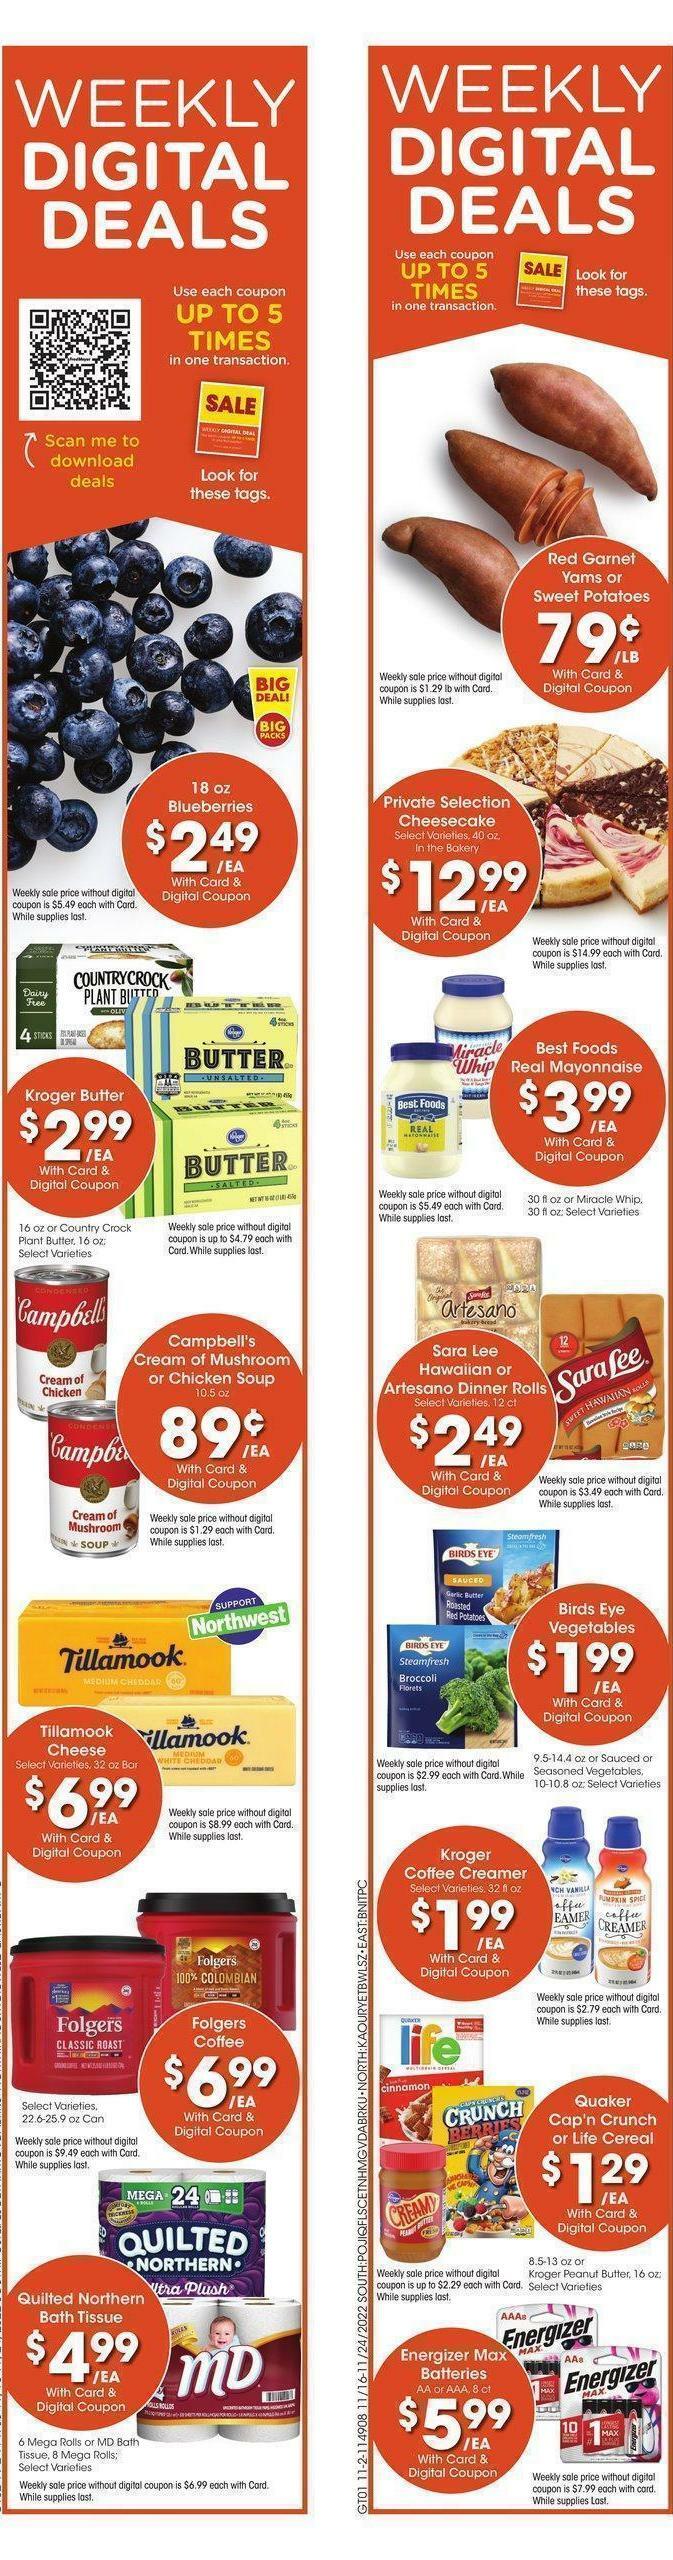 Fred Meyer Weekly Ad from November 16